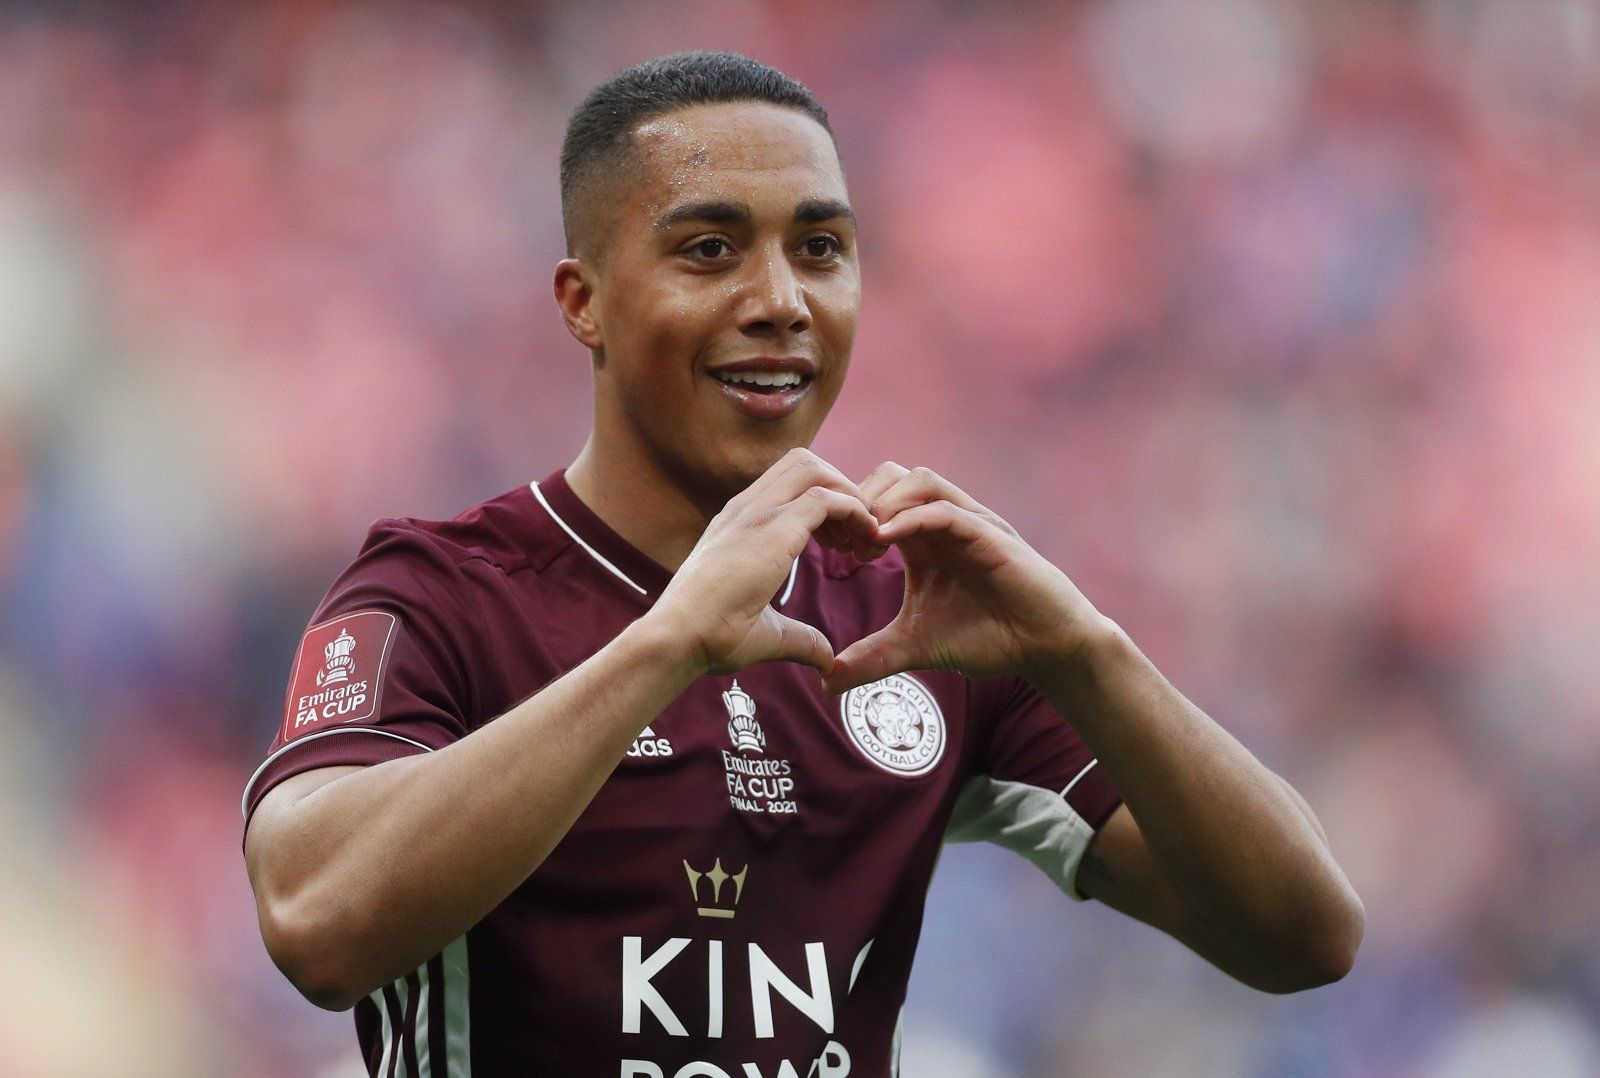 Leicester City: Real Madrid keen on swoop for Youri Tielemans -Leicester